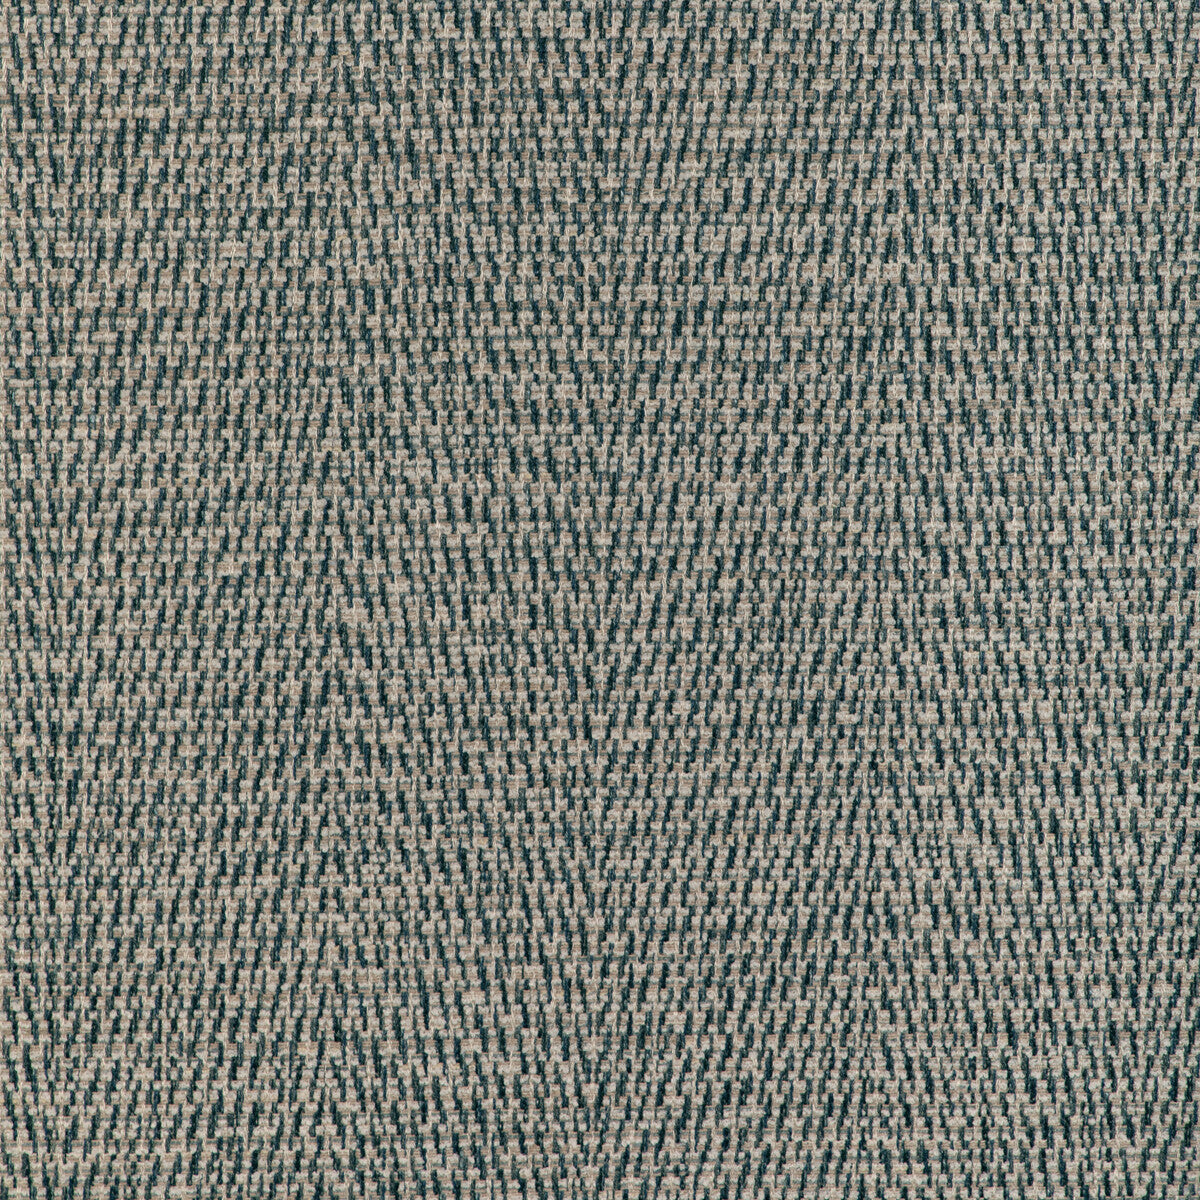 Diderot Texture fabric in blue color - pattern 8023132.51.0 - by Brunschwig &amp; Fils in the Arles Weaves collection